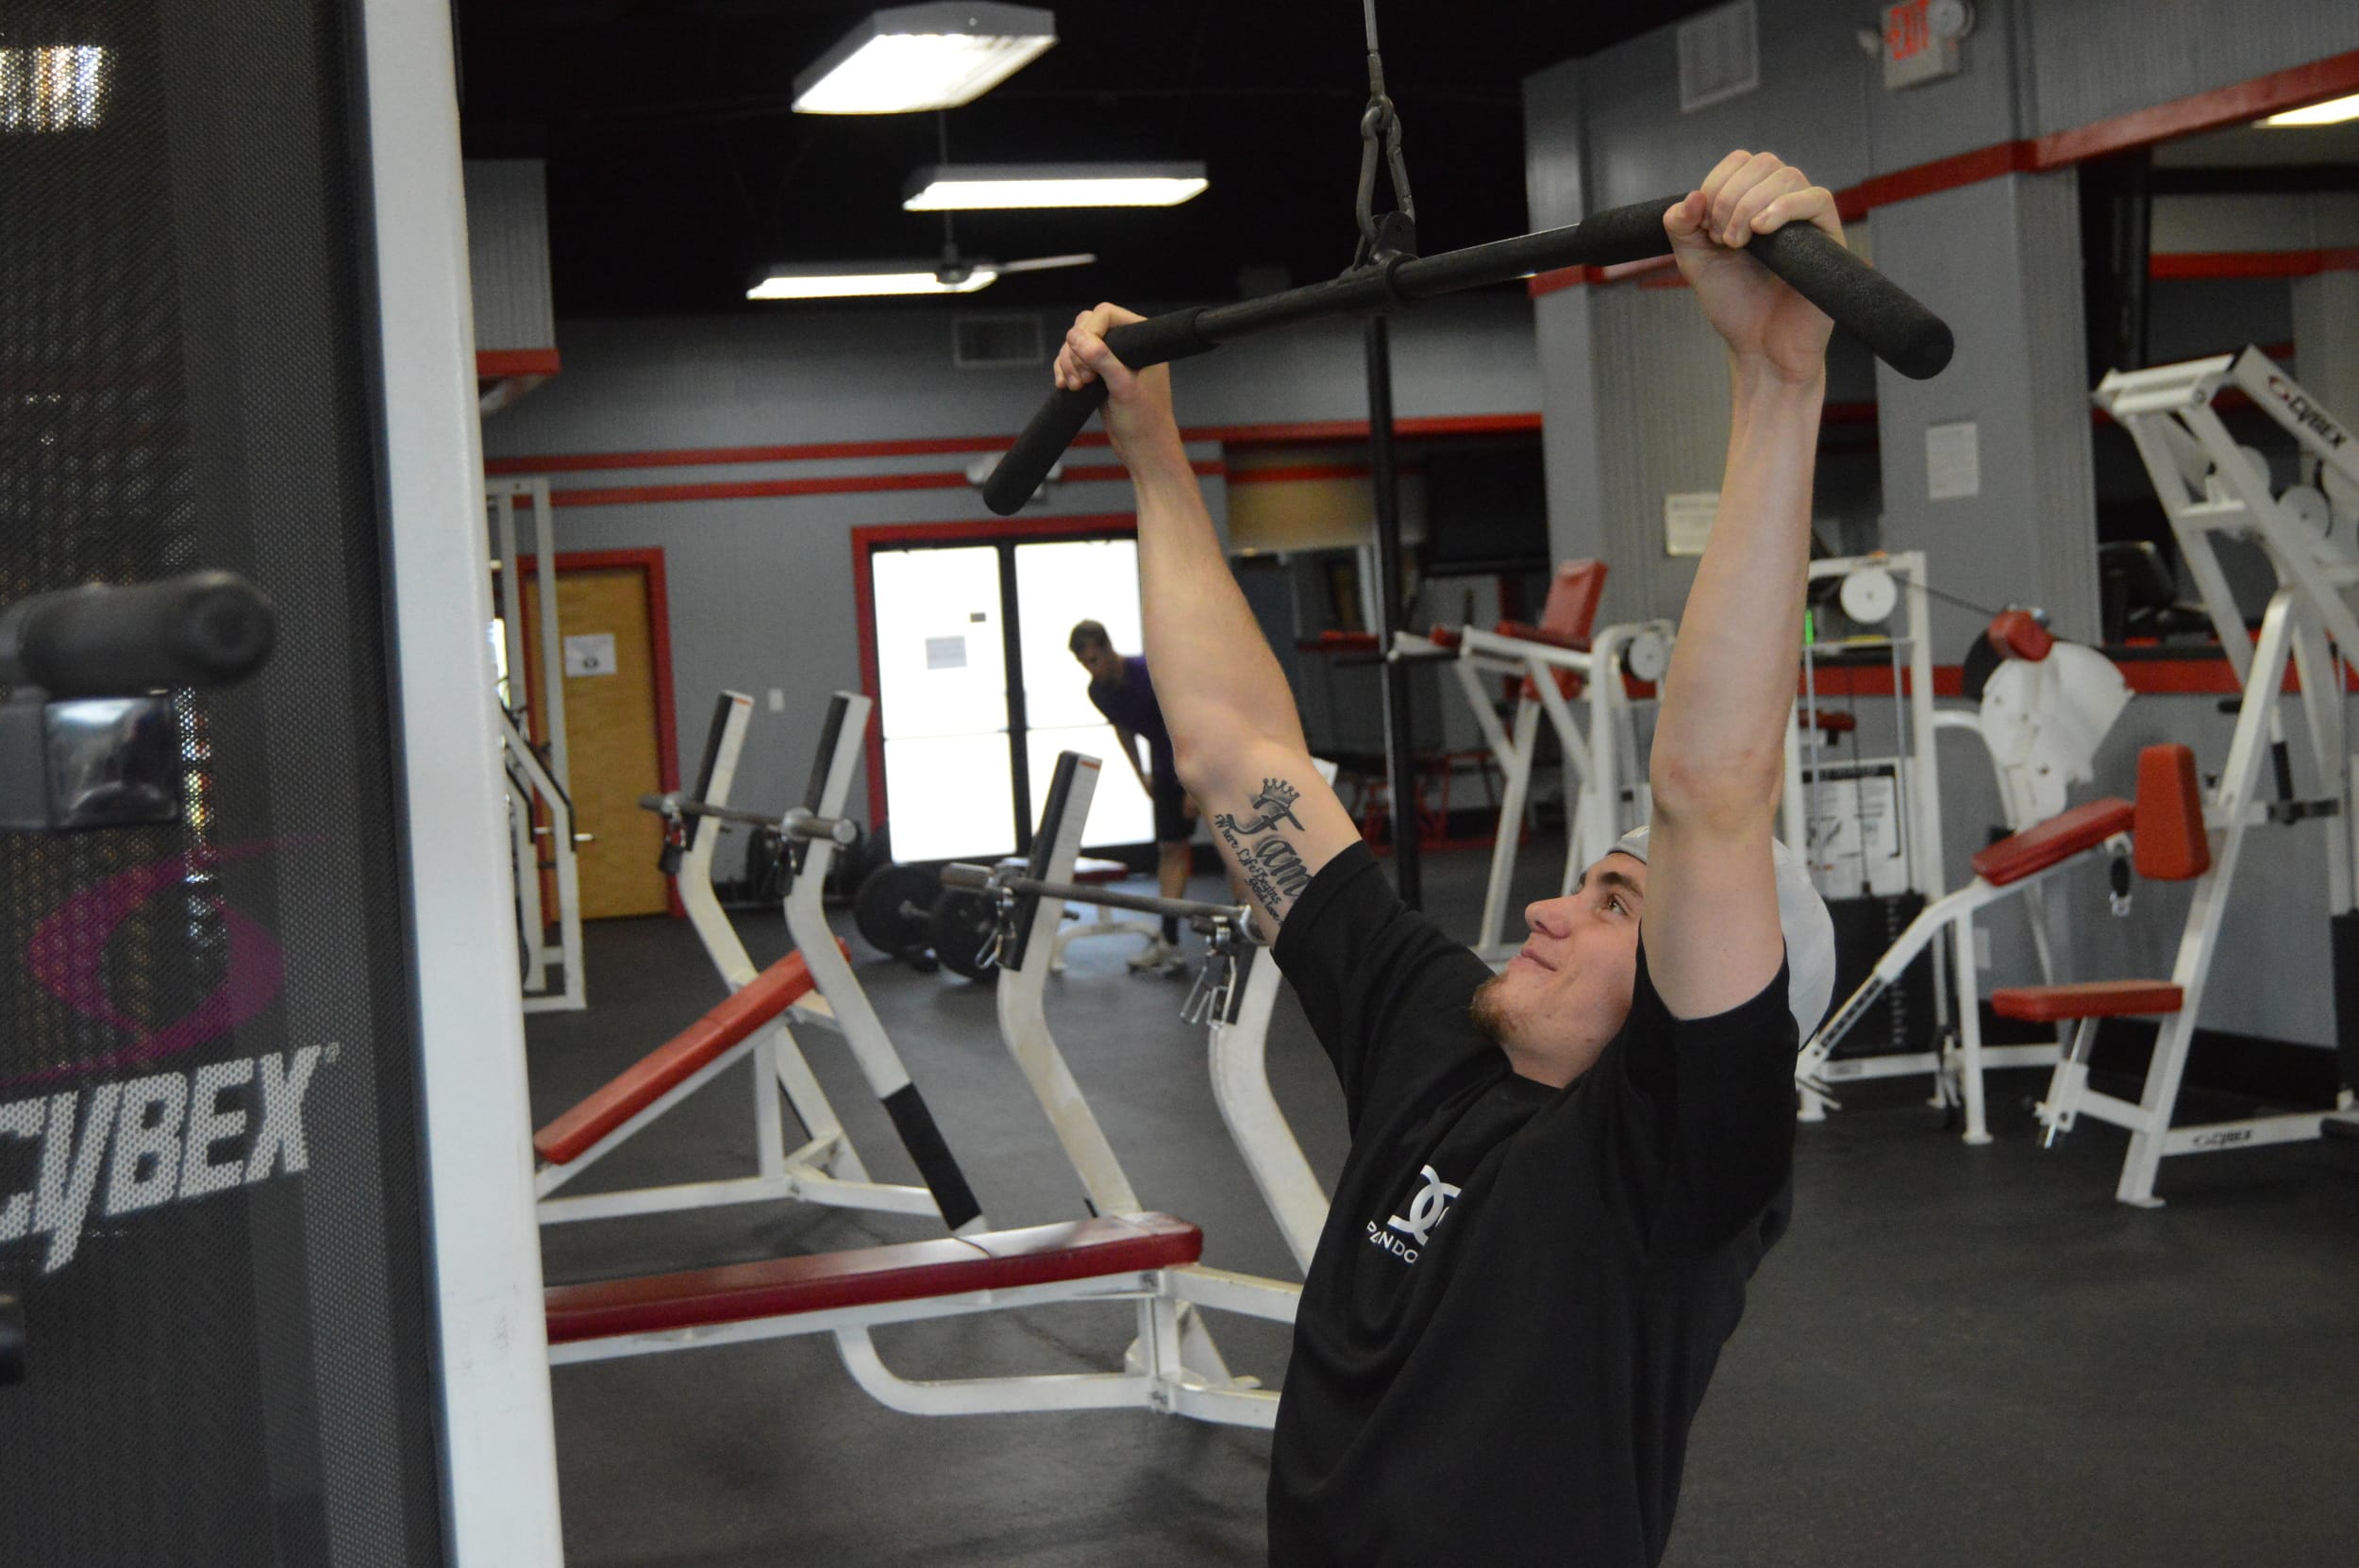 The lat pulldown machine works your back muscles. Try completing three sets of 20 reps to sculpt your back!&nbsp;